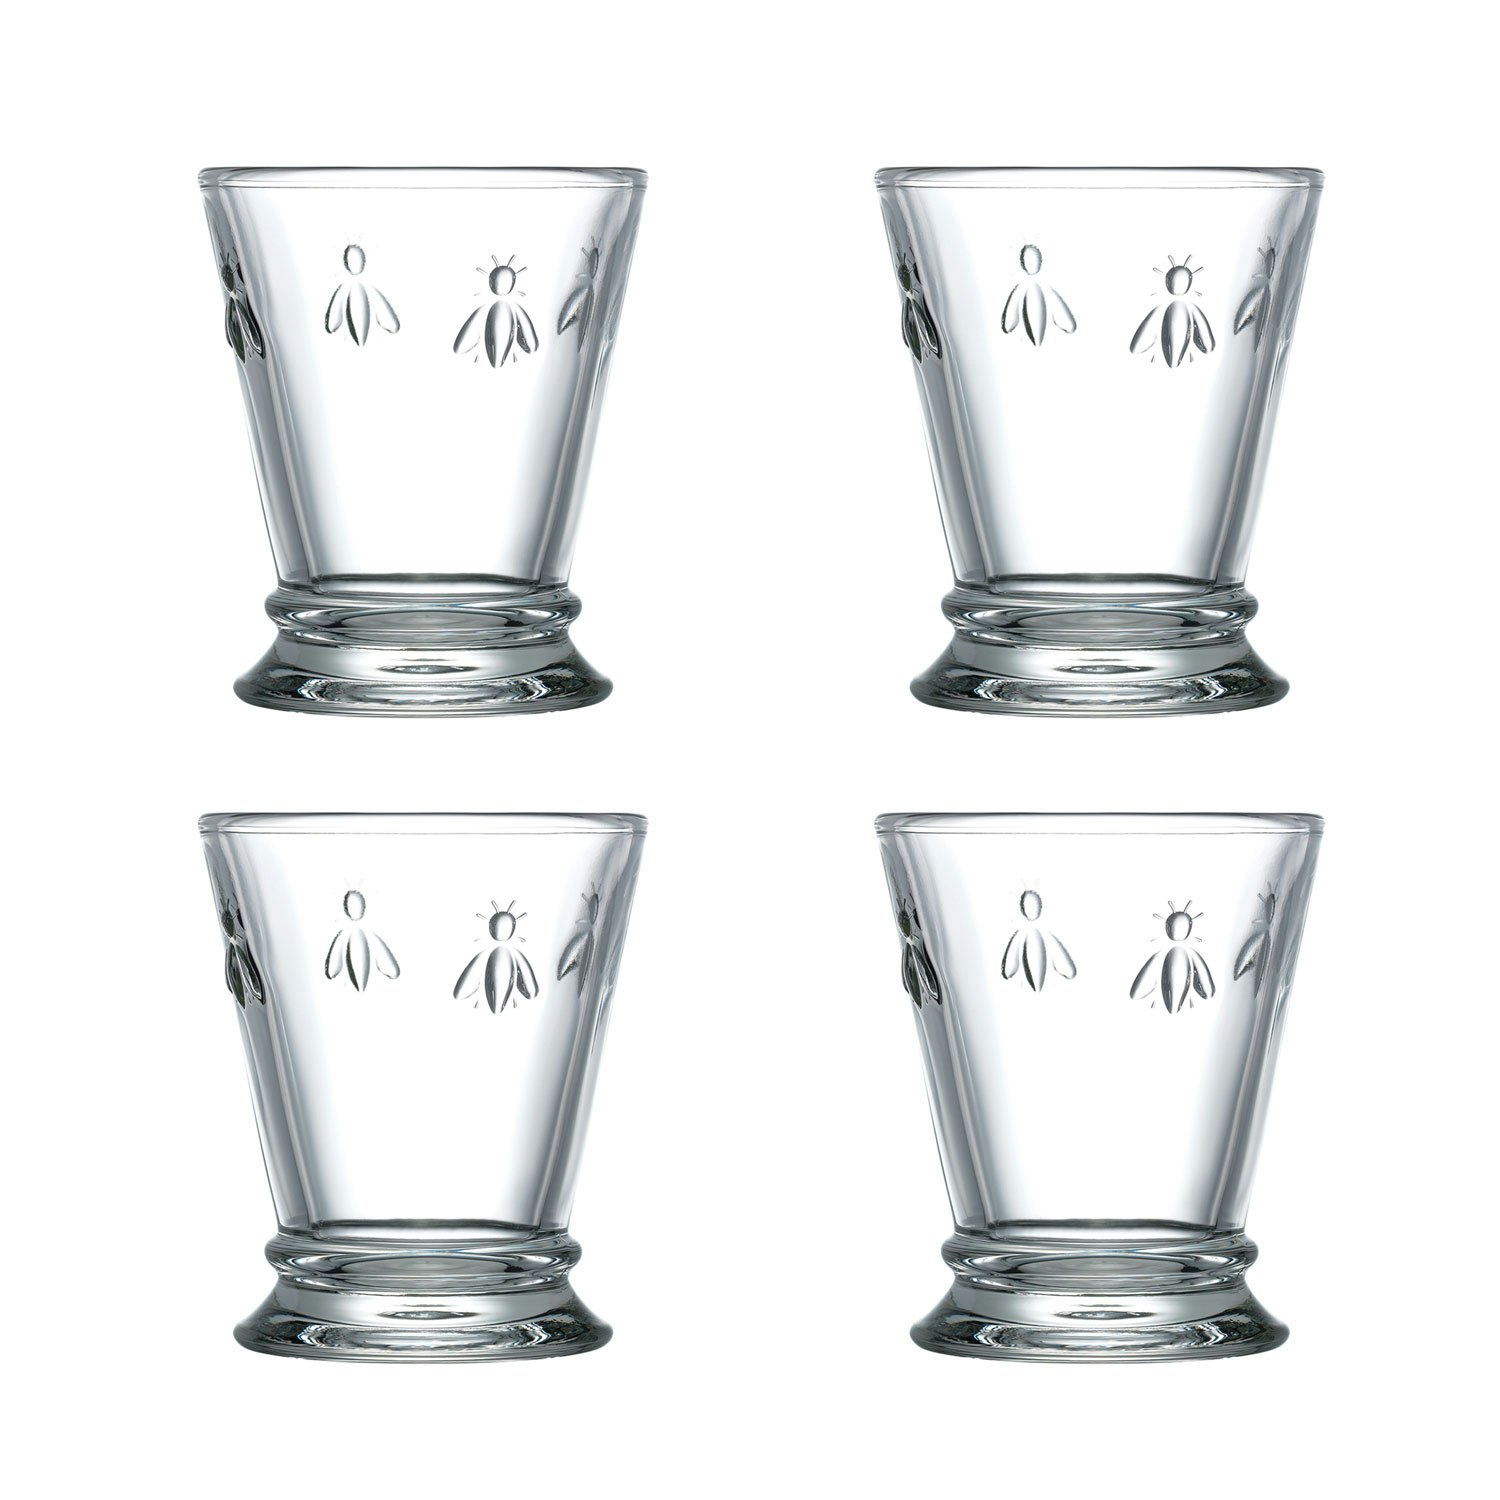 La Rochère Bee Tumblers, Set of 6, Glass, Made in France on Food52